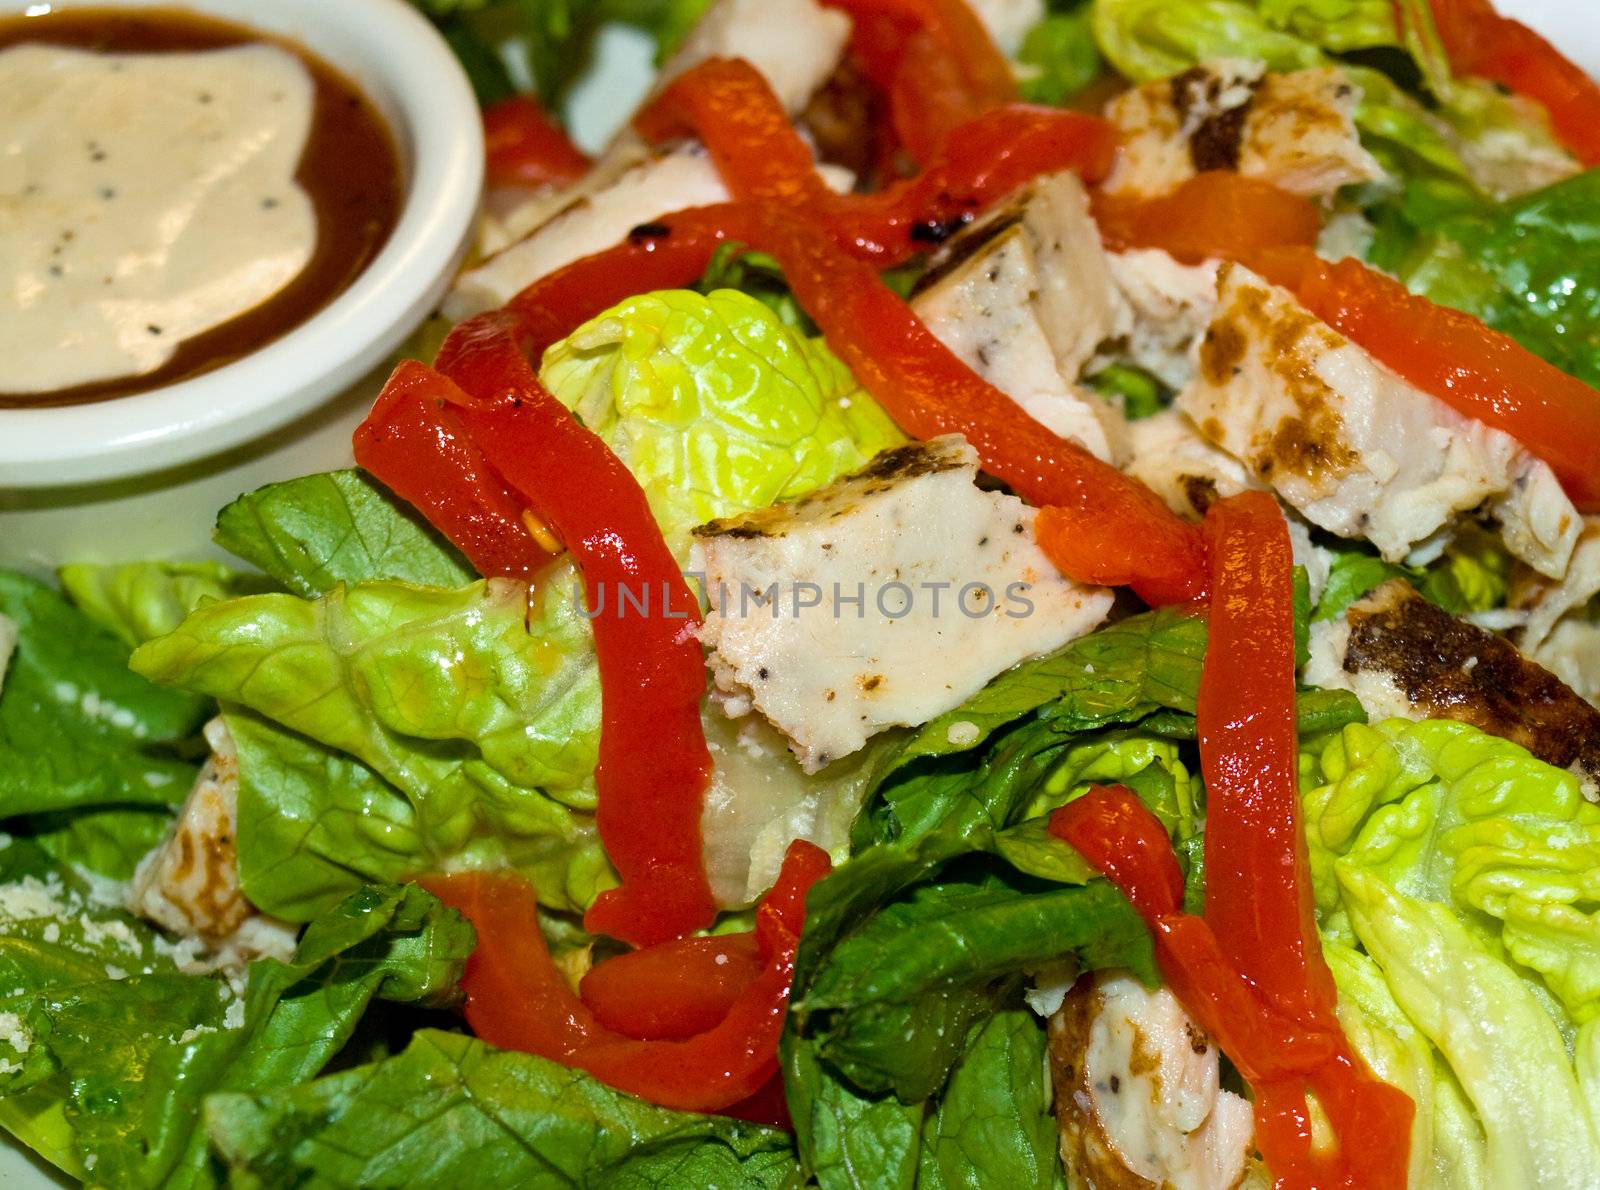 Healthy Salad with Lettuce, Red Peppers, and Chicken